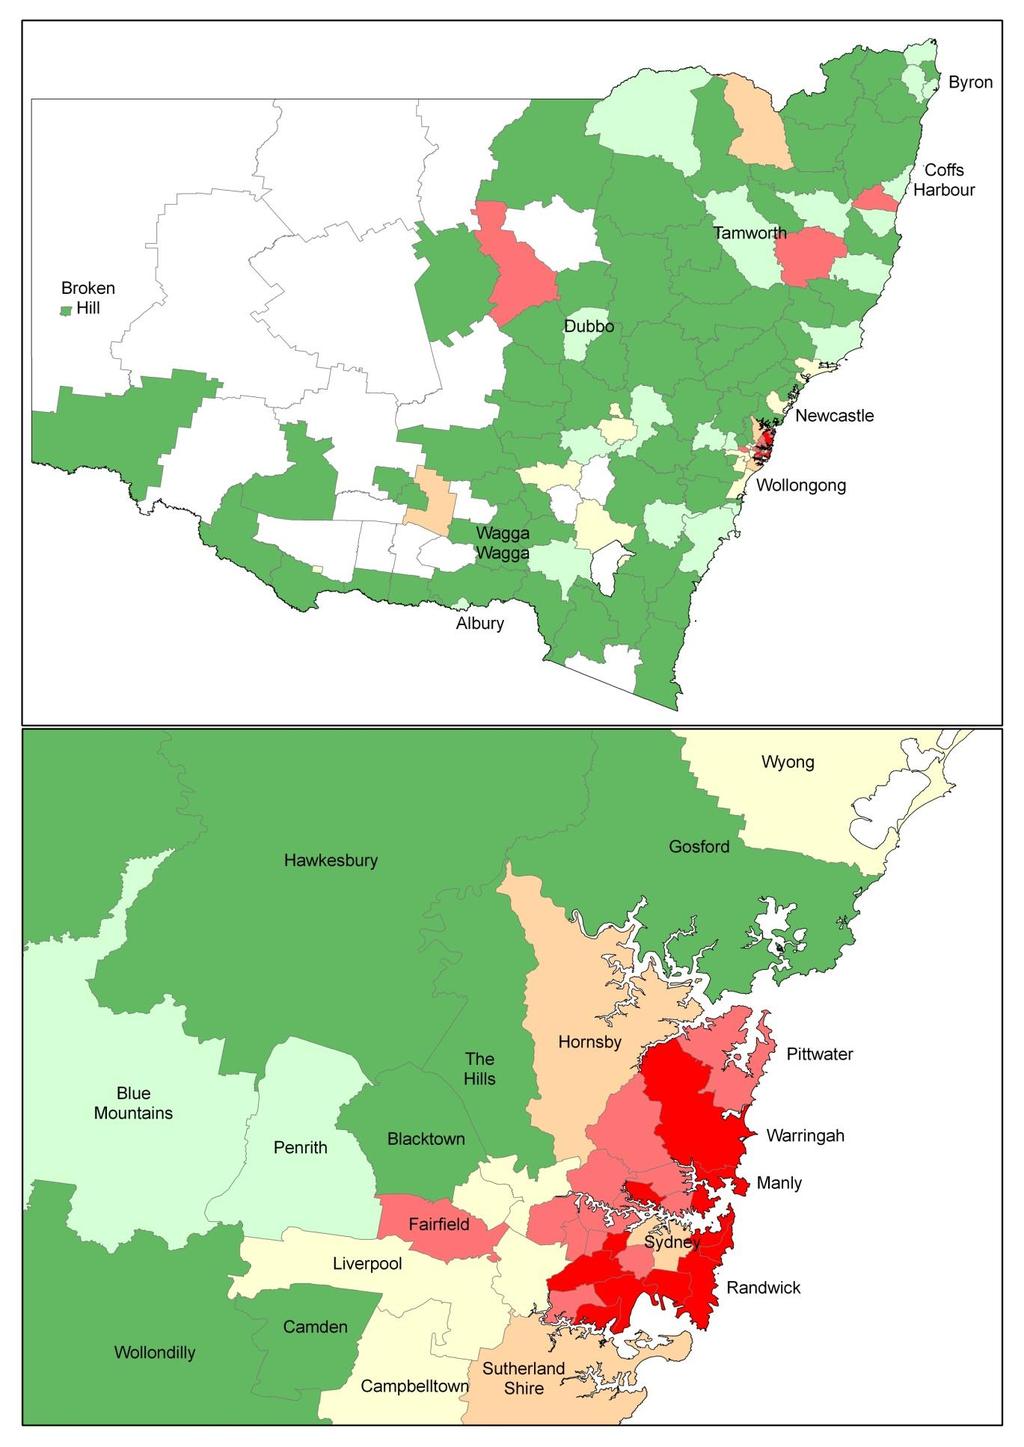 Maps 11 and 12: Percentage of residential & mixed use schemes registered* prior to 1979 for NSW and Sydney by LGA, January 2011